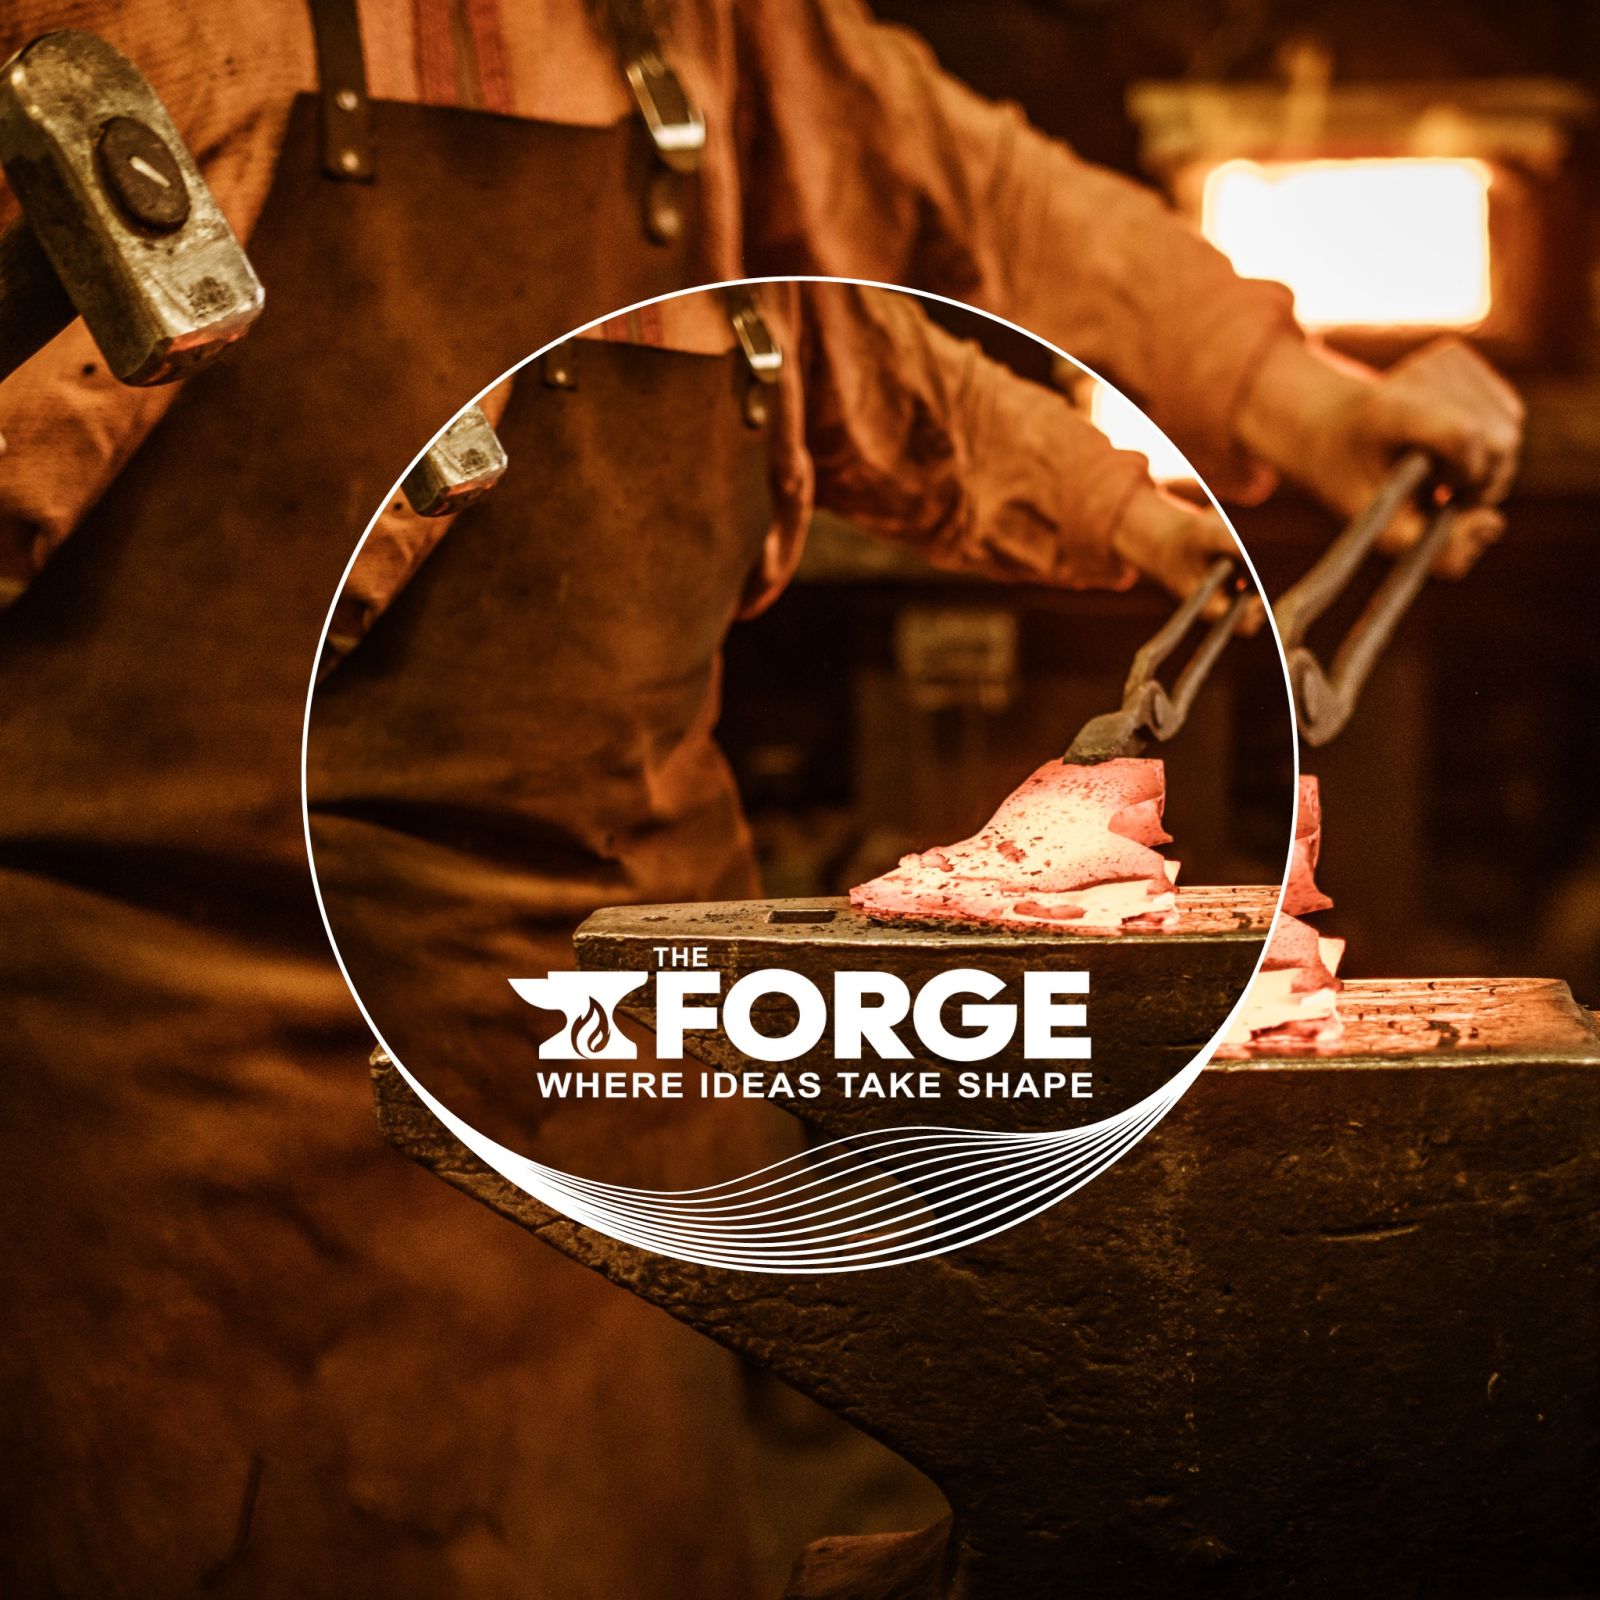 Grand opening of the forge, a place where ideas take shape Article Photo